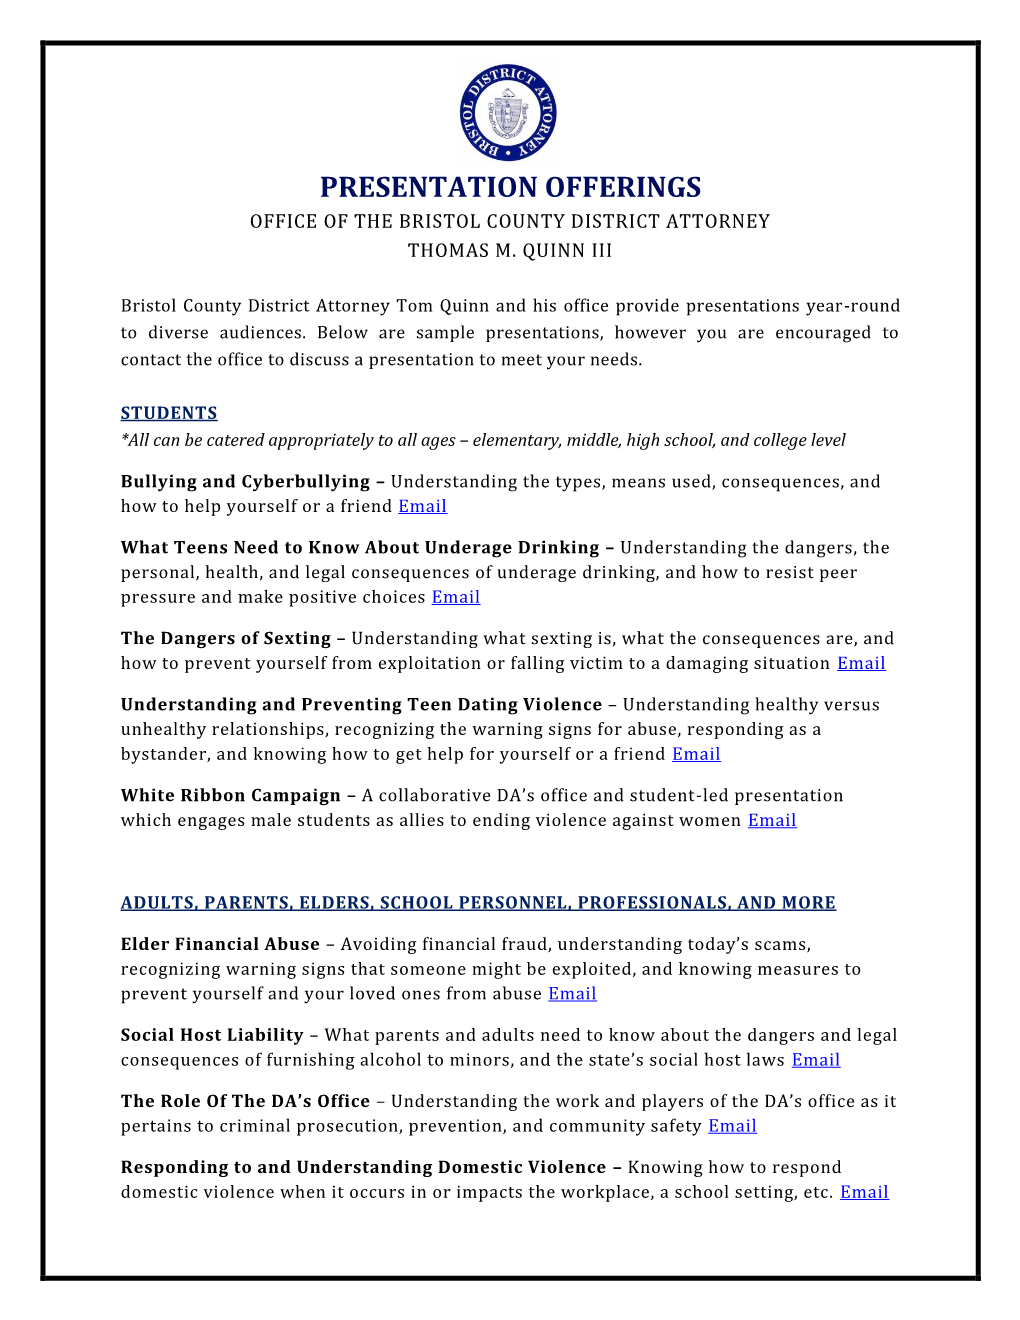 Presentation Offerings Office of the Bristol County District Attorney Thomas M